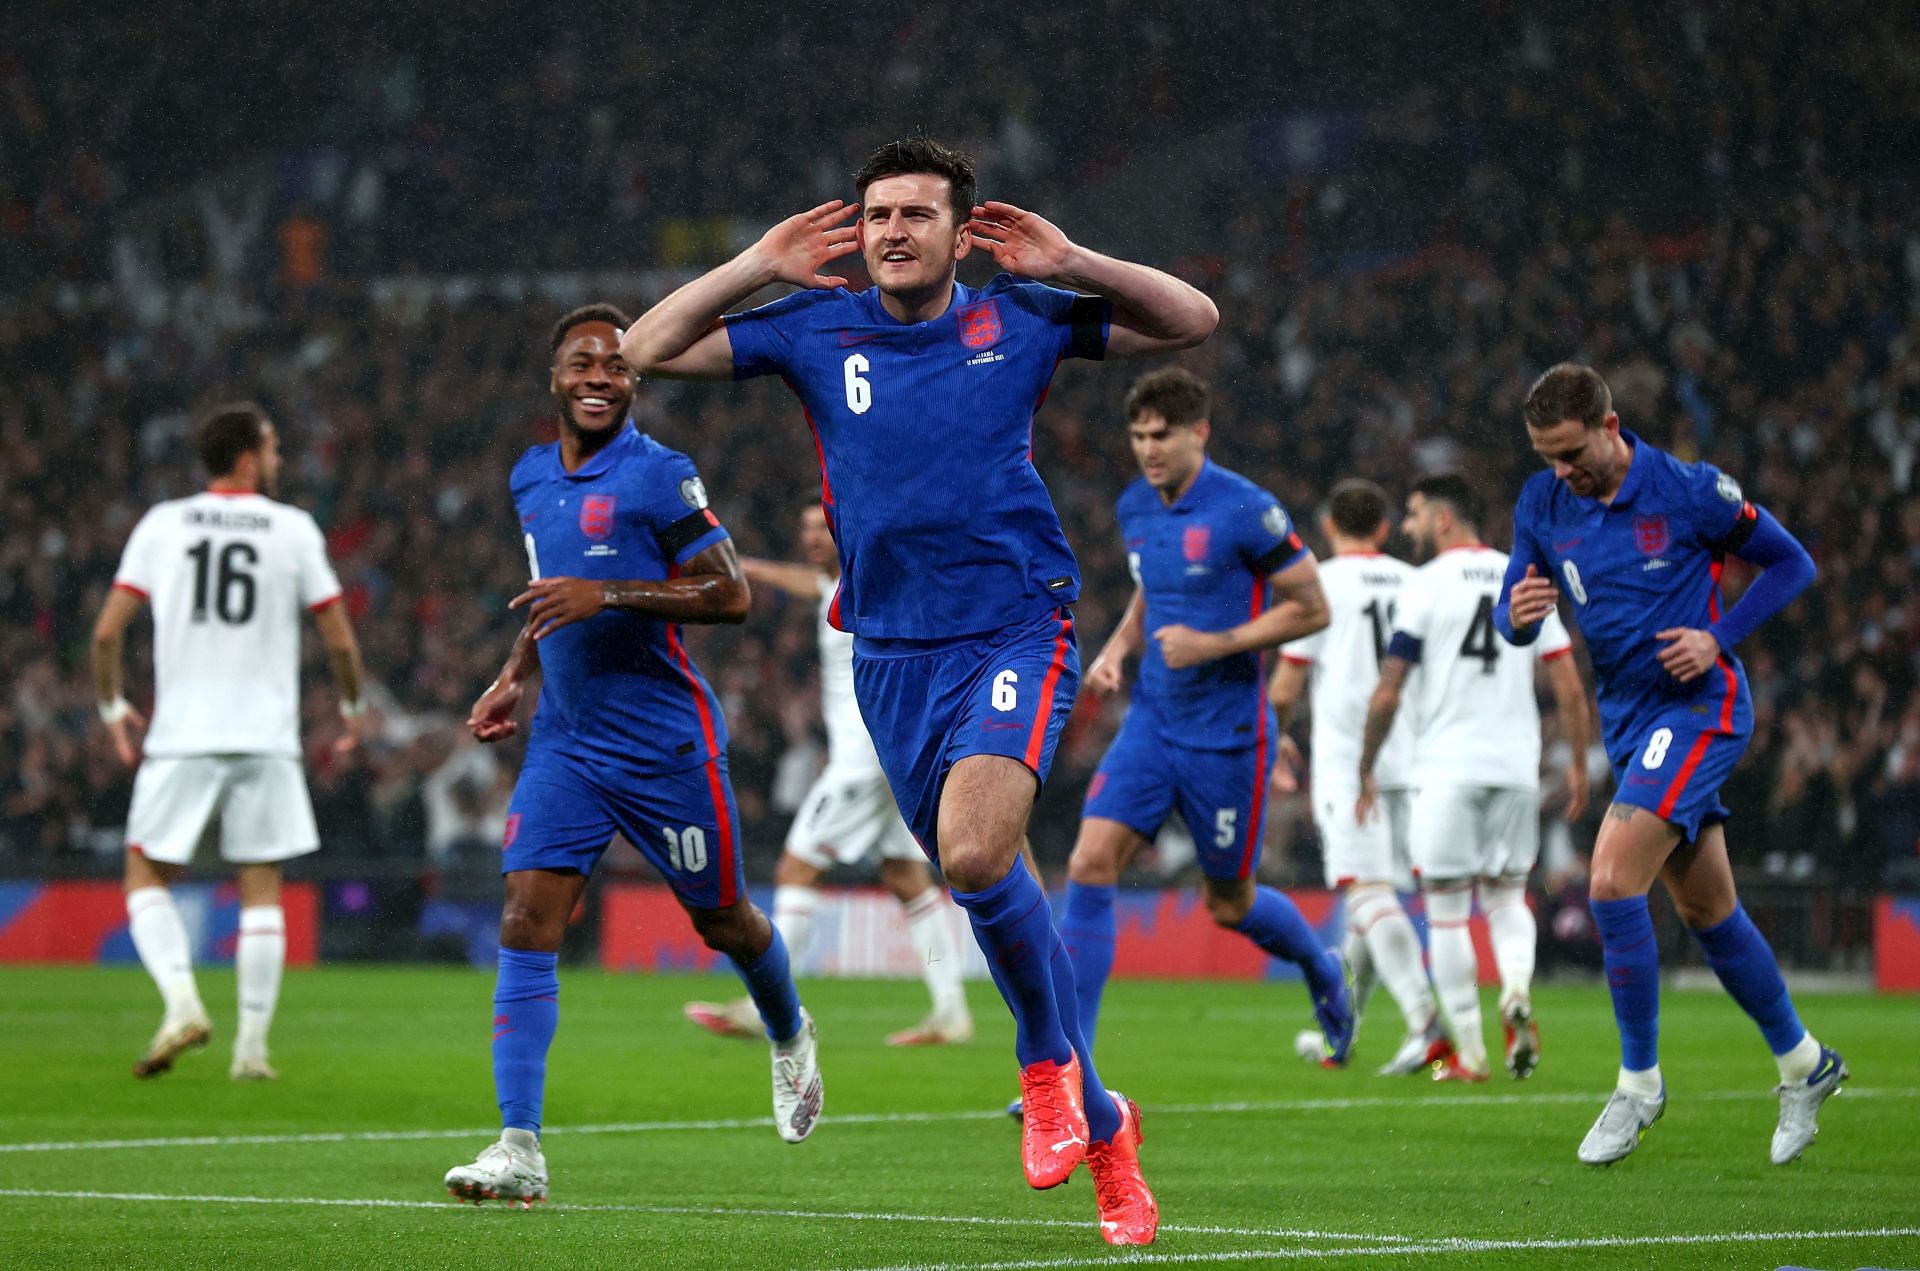 Manchester United captain Harry Maguire was criticized for his recent celebration